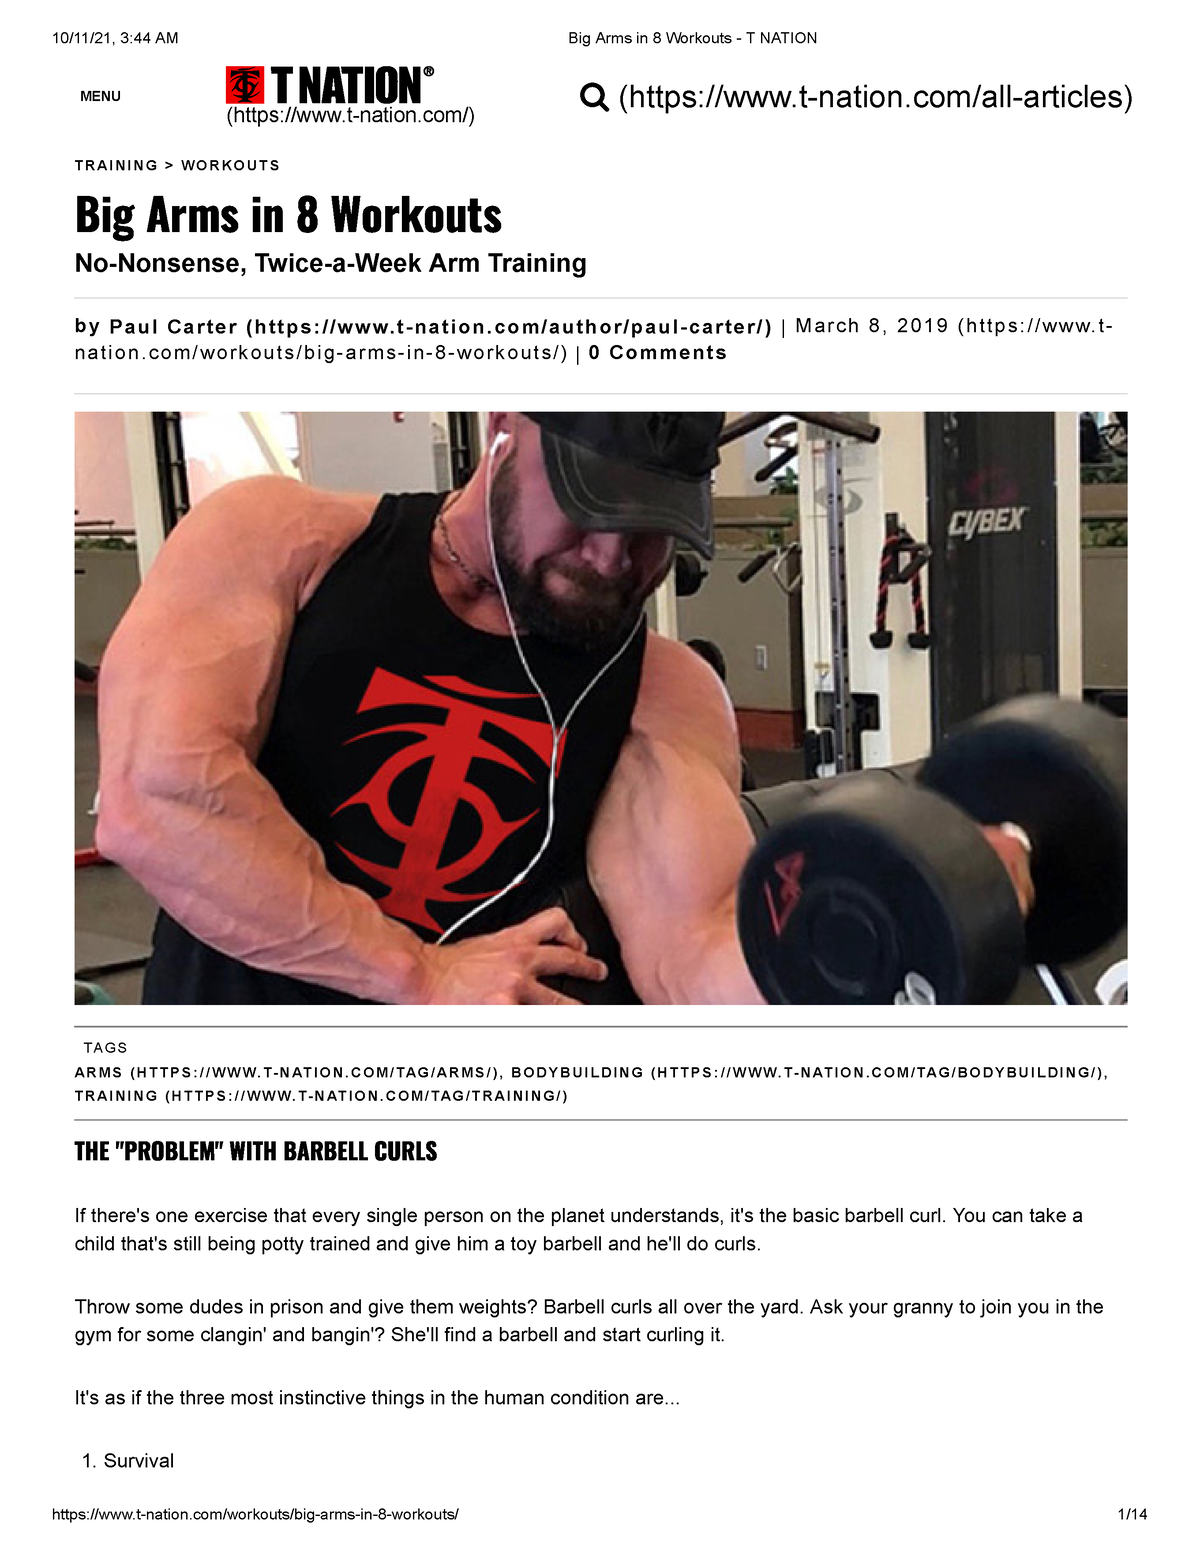 Big Arms in 8 Workouts